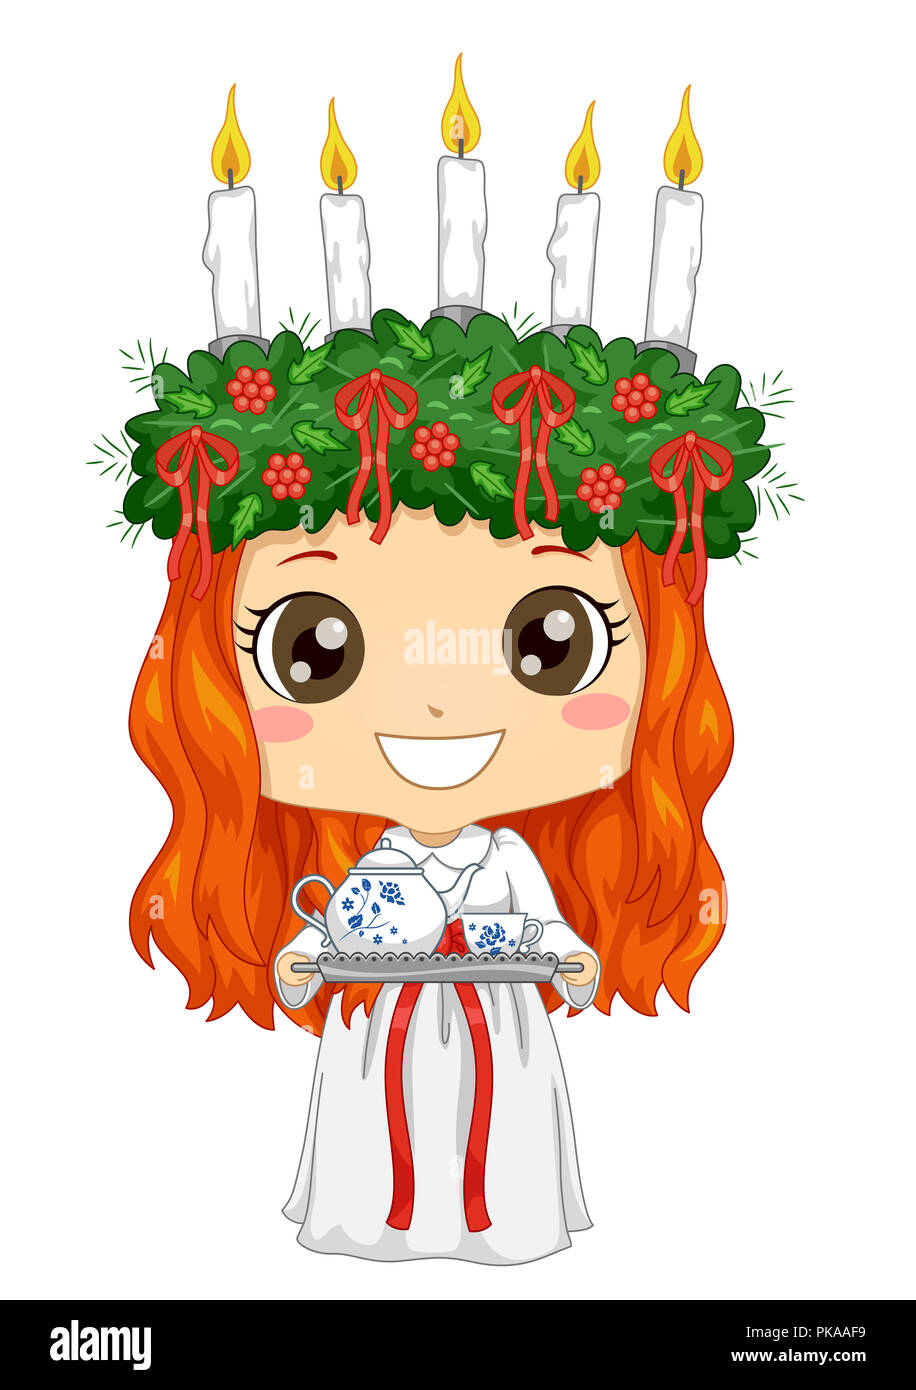 Illustration of a Kid Girl Wearing a Little Saint Lucia Costume Serving Coffee Stock Photo